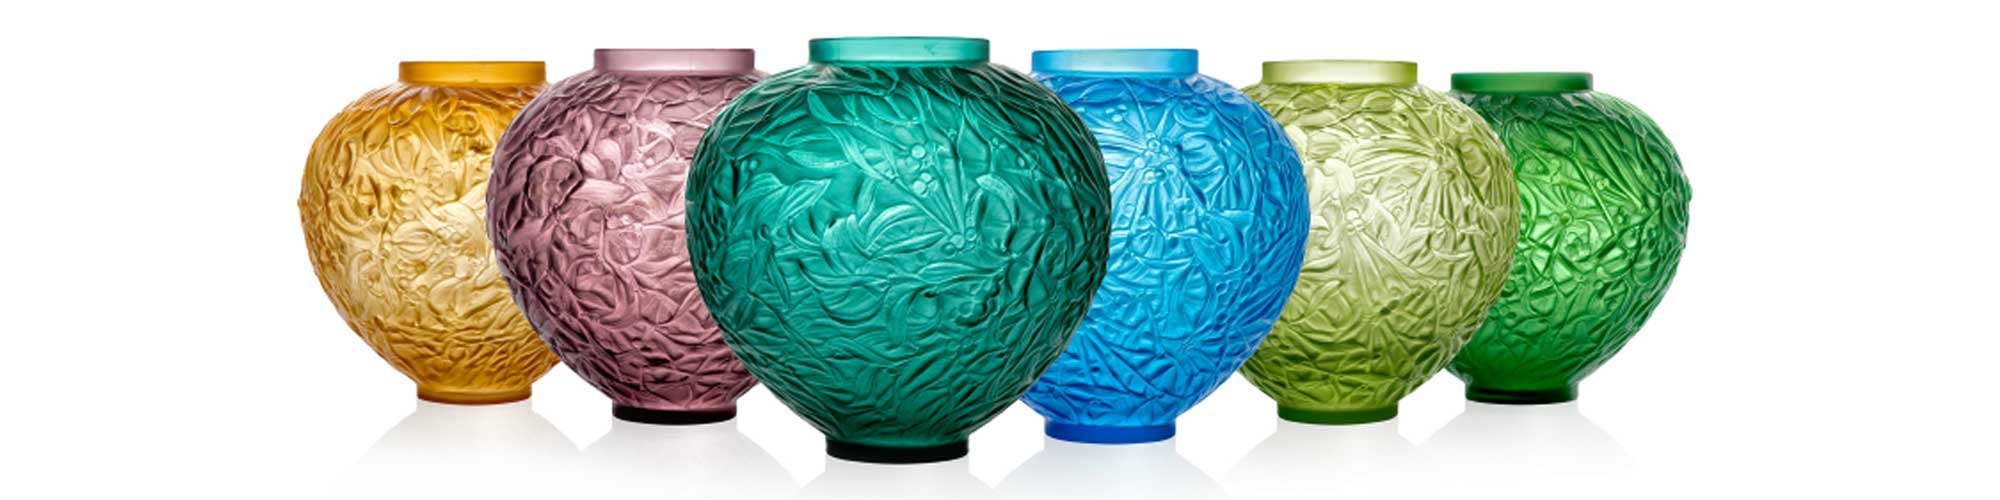 Lalique - Thriving in a Colourful Collecting Market